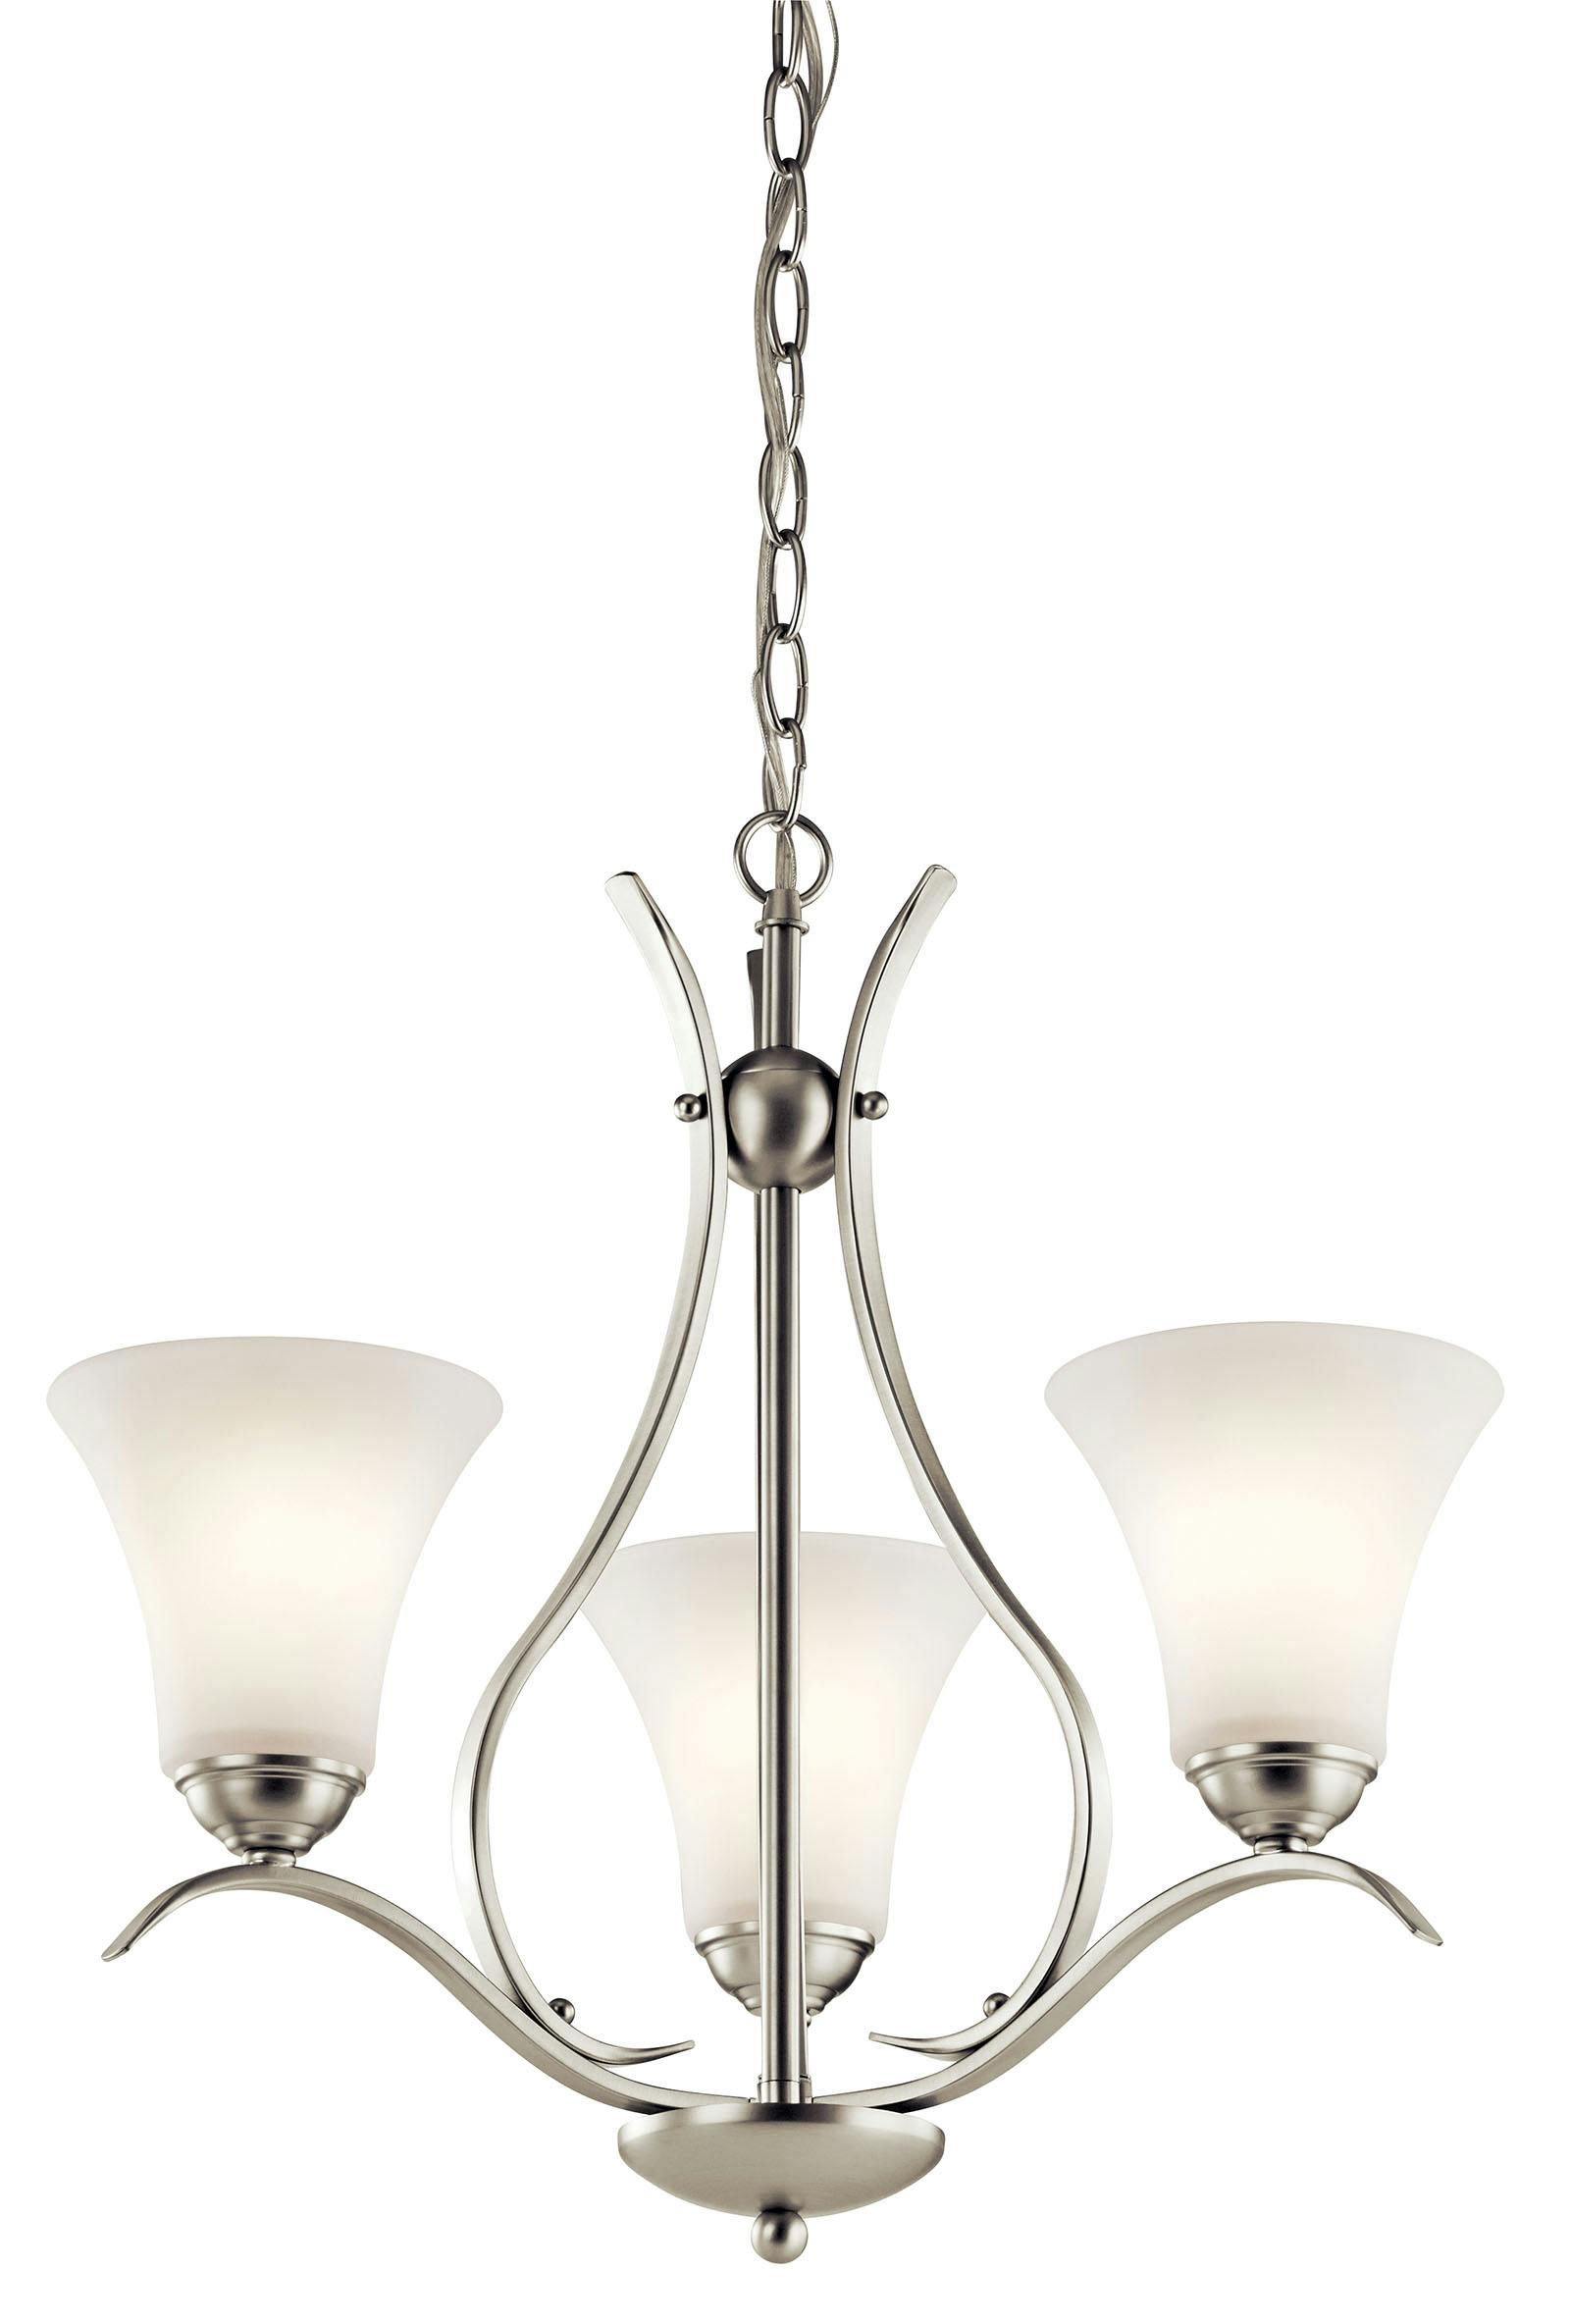 Keiran™ 3 Light Chandelier Brushed Nickel on a white background